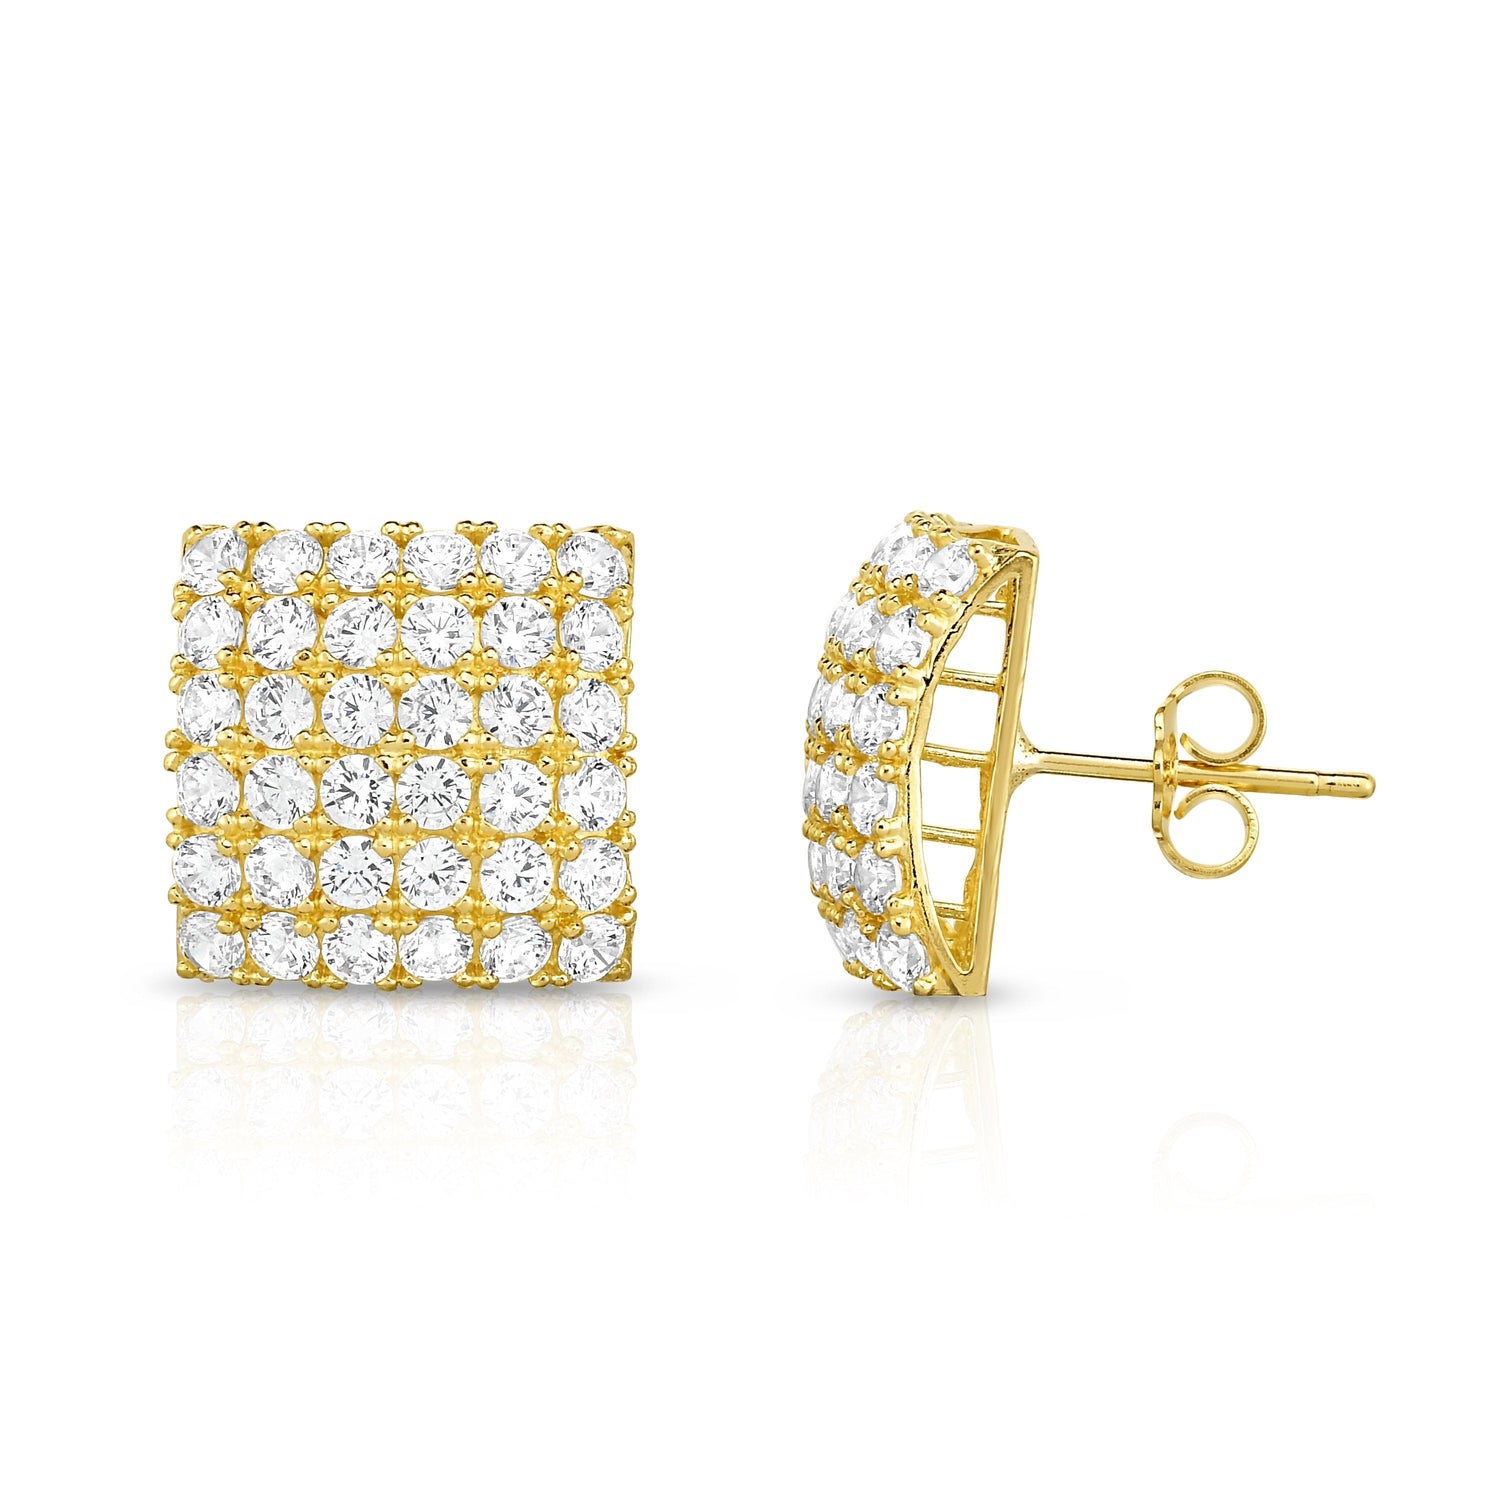 10k Yellow Gold Fancy Square Micropave CZ Accented Stud Earrings